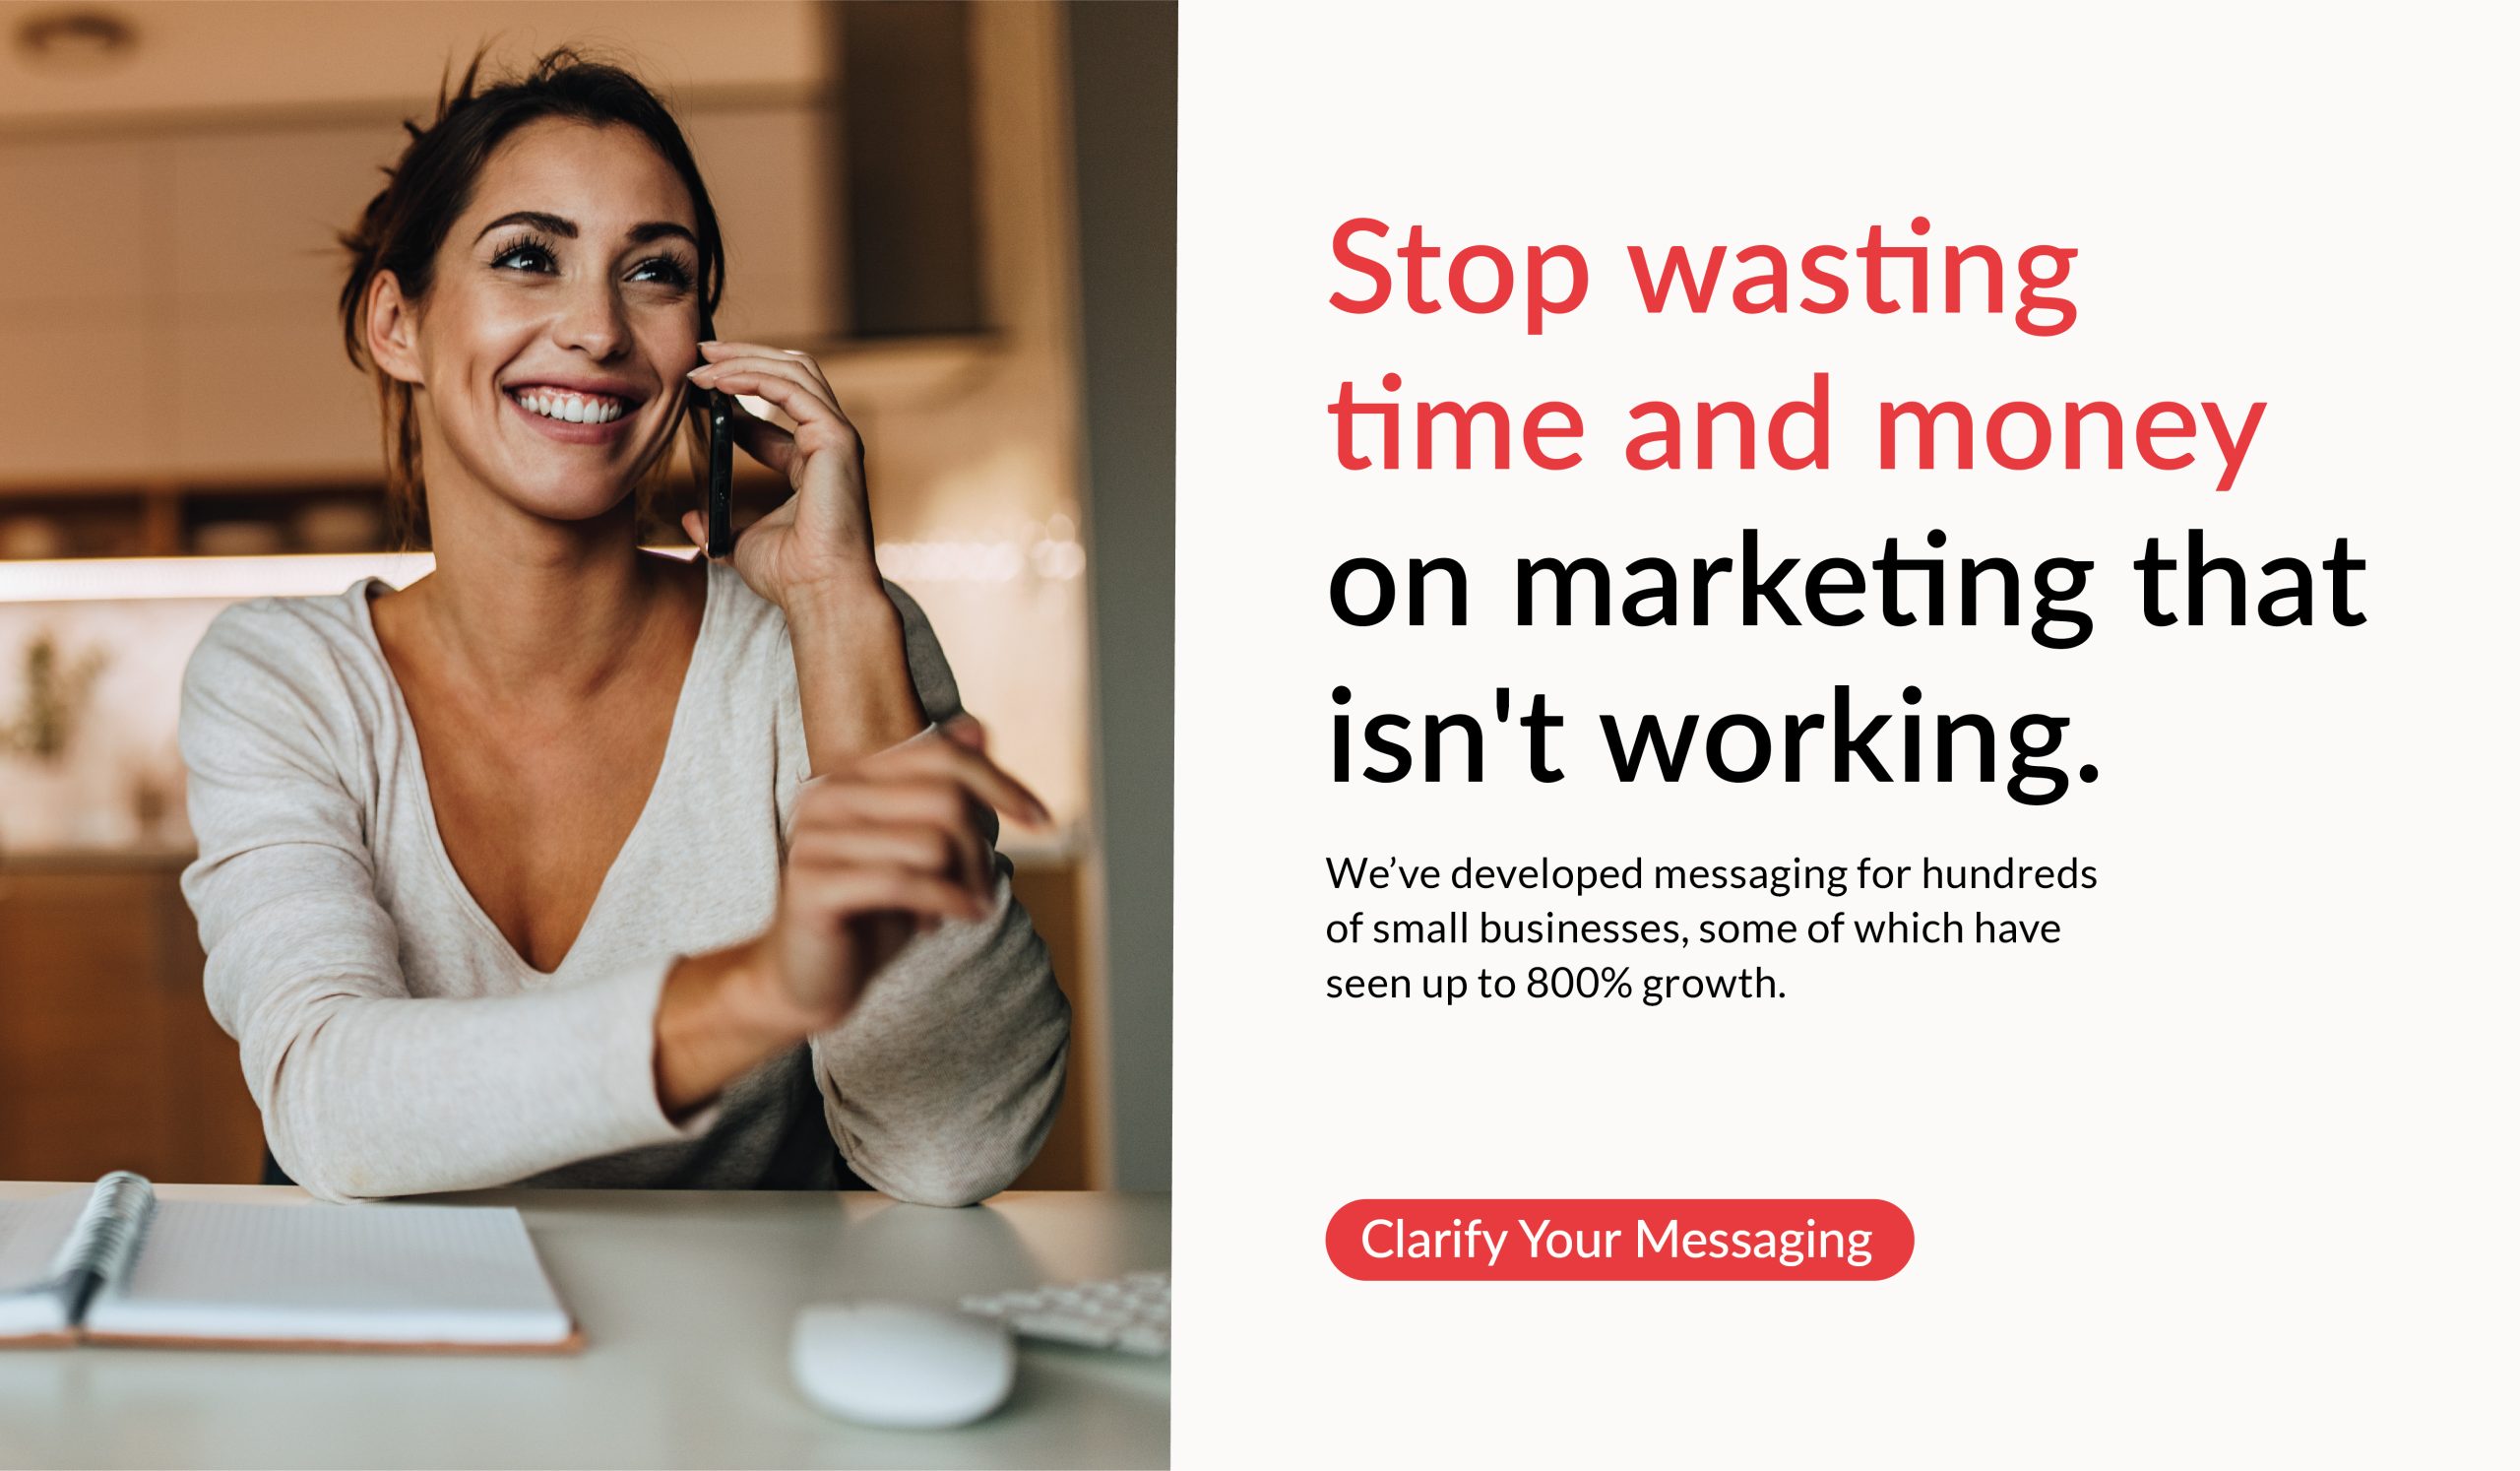 Be confident in your marketing strategy and learn how to clarify your messaging for small businesses.